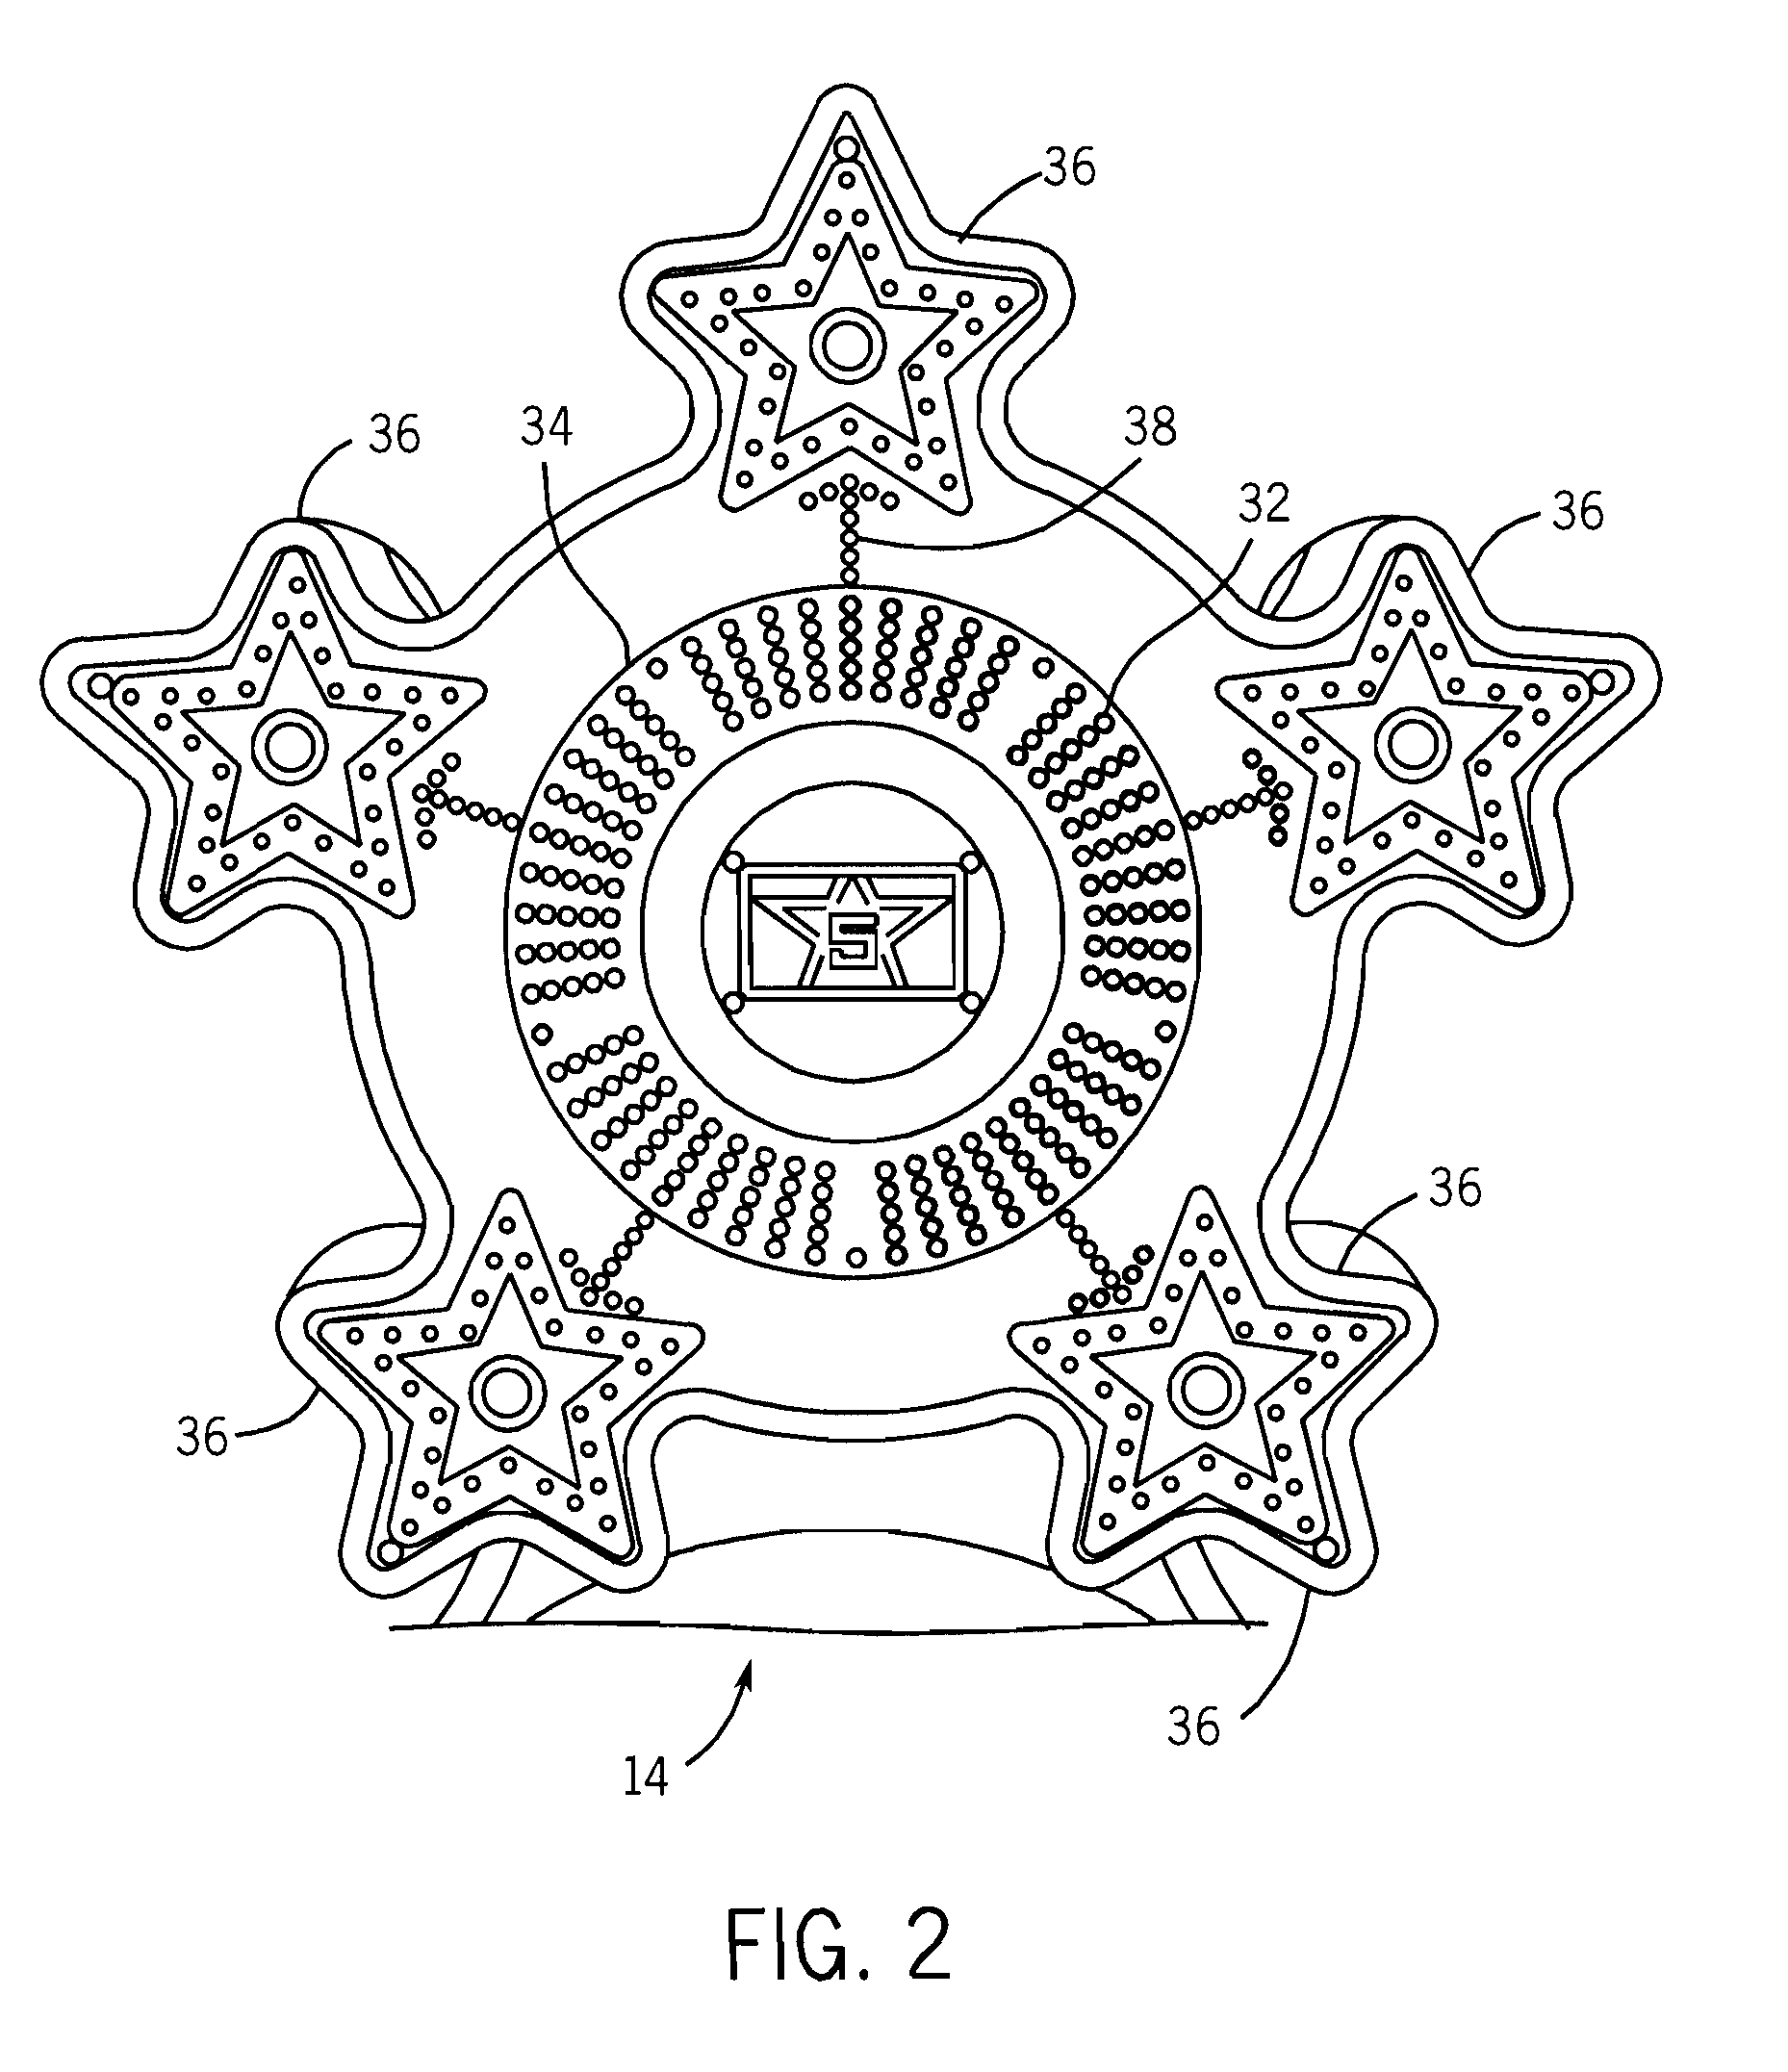 Game of skill and method of operating